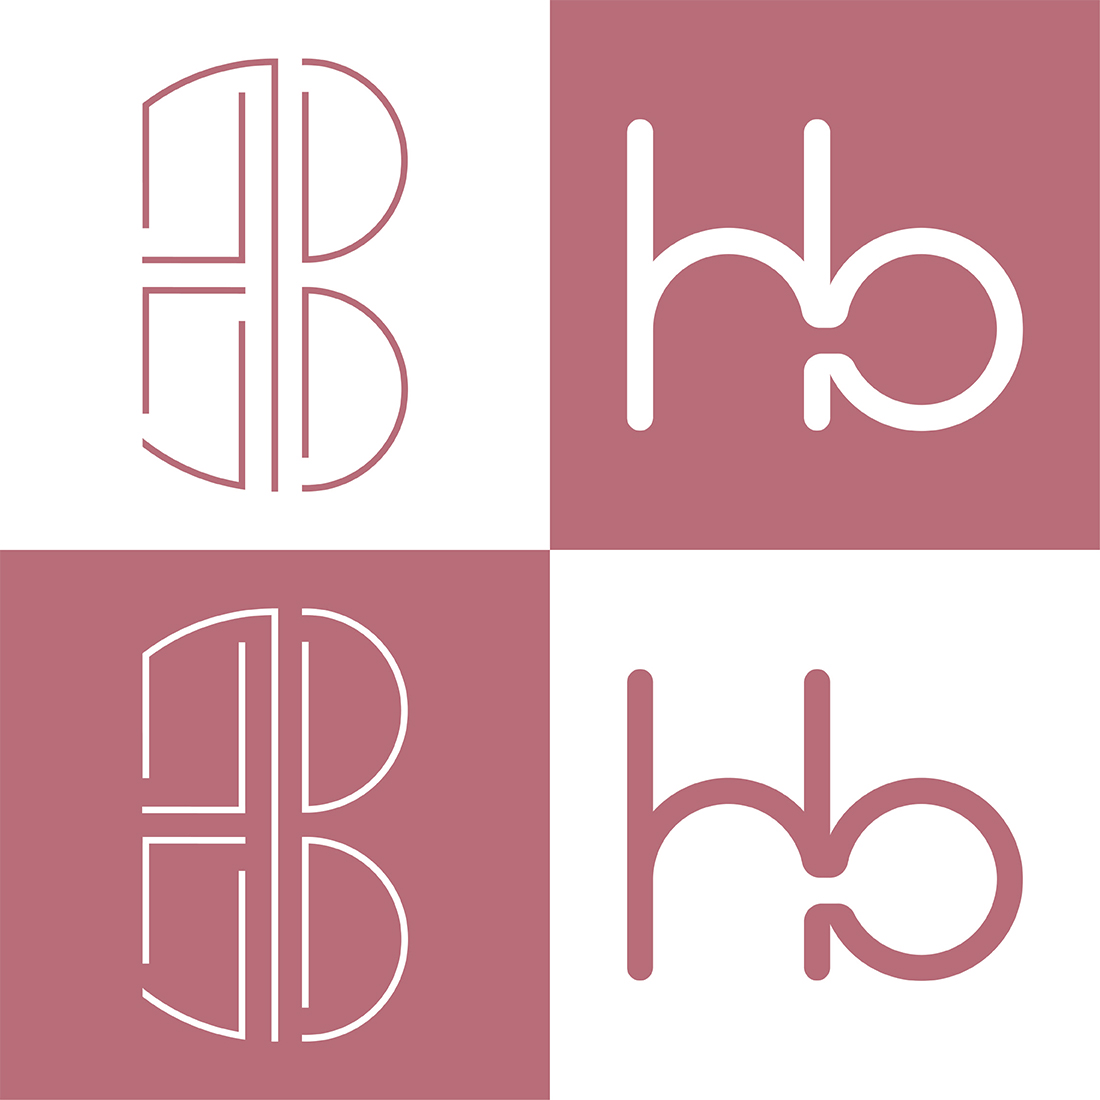 Pair of Letters HB logo example.